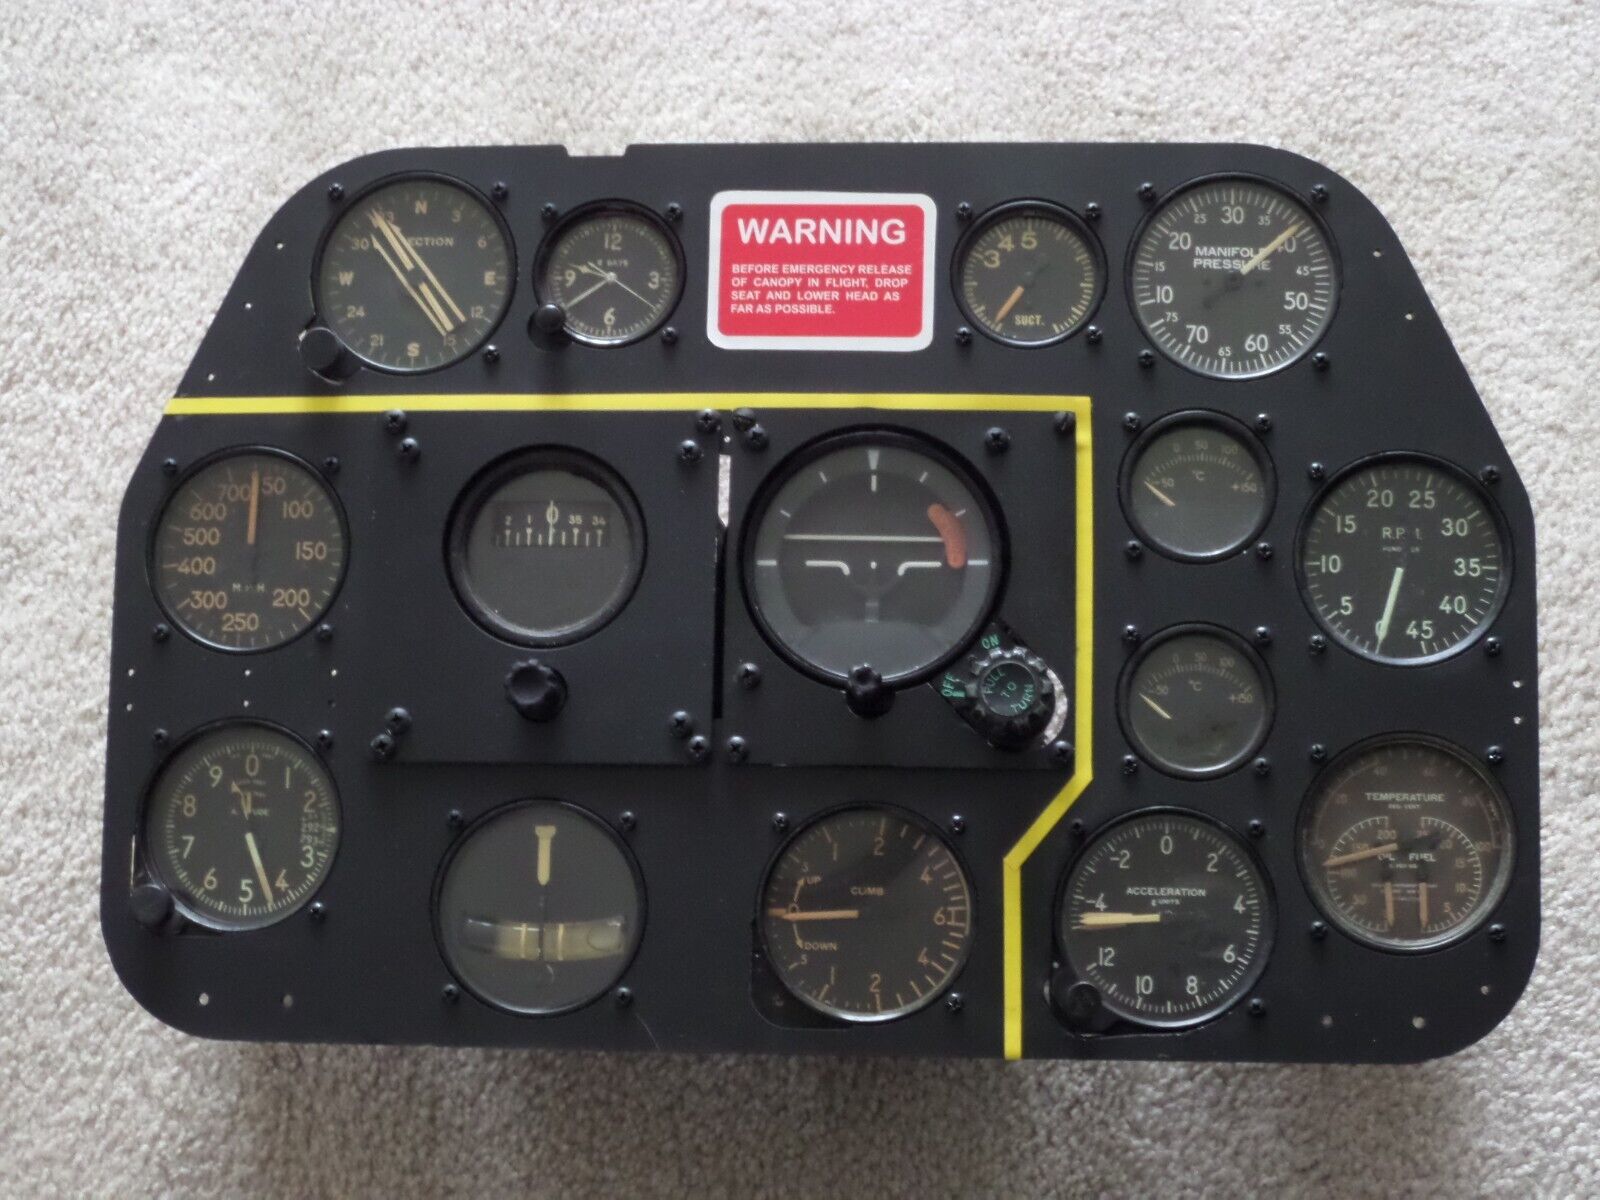  P-51 MUSTANG MAIN INSTRUMENT PANEL 15 0RIGINAL WWII ARMY AIR FORCE GAUGES EXC.